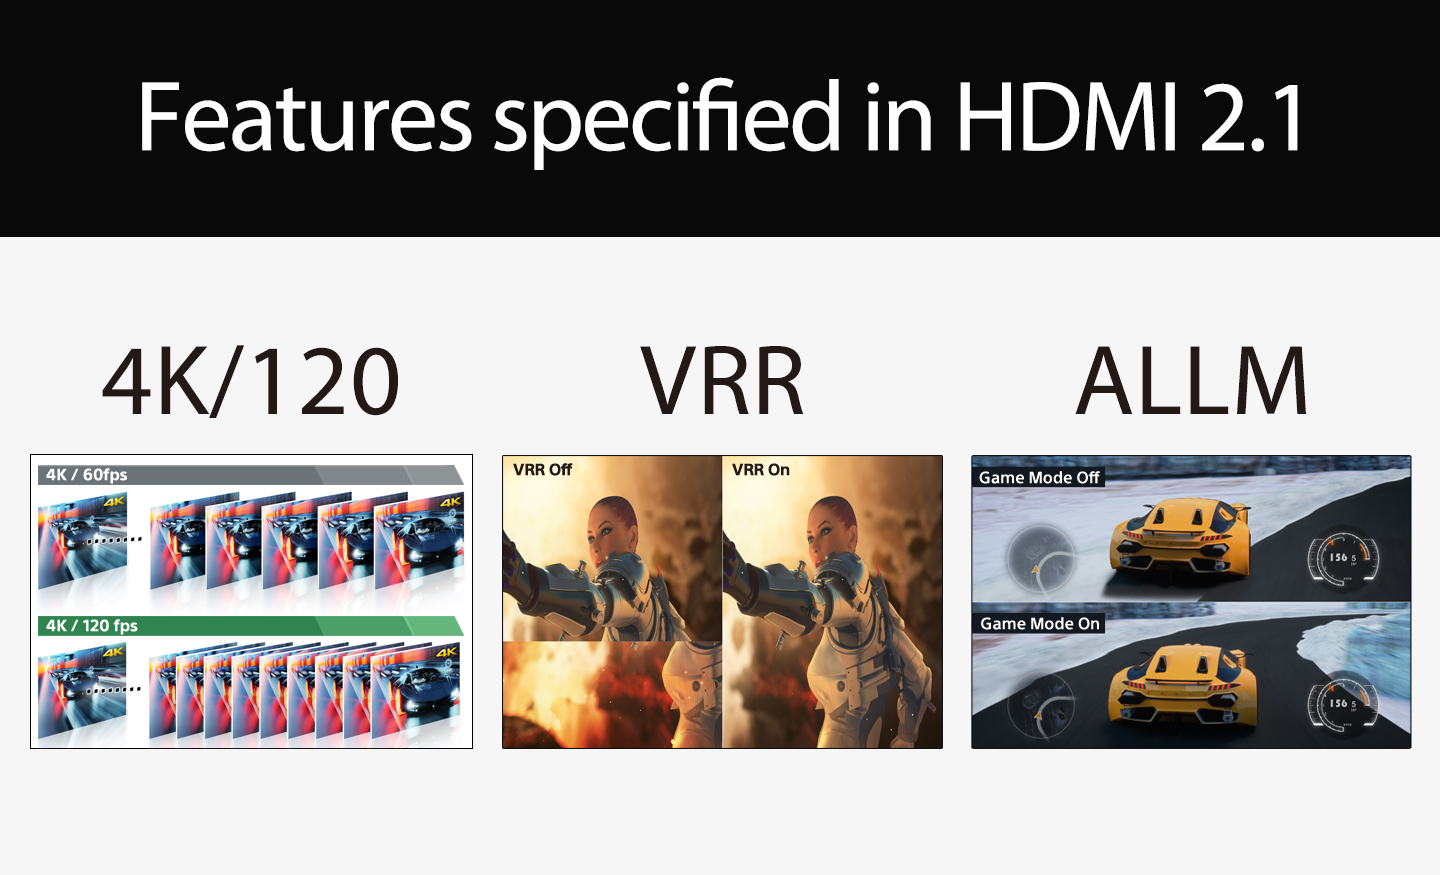 HDMI 2.1 features ALLM VRR and 4K/120hz